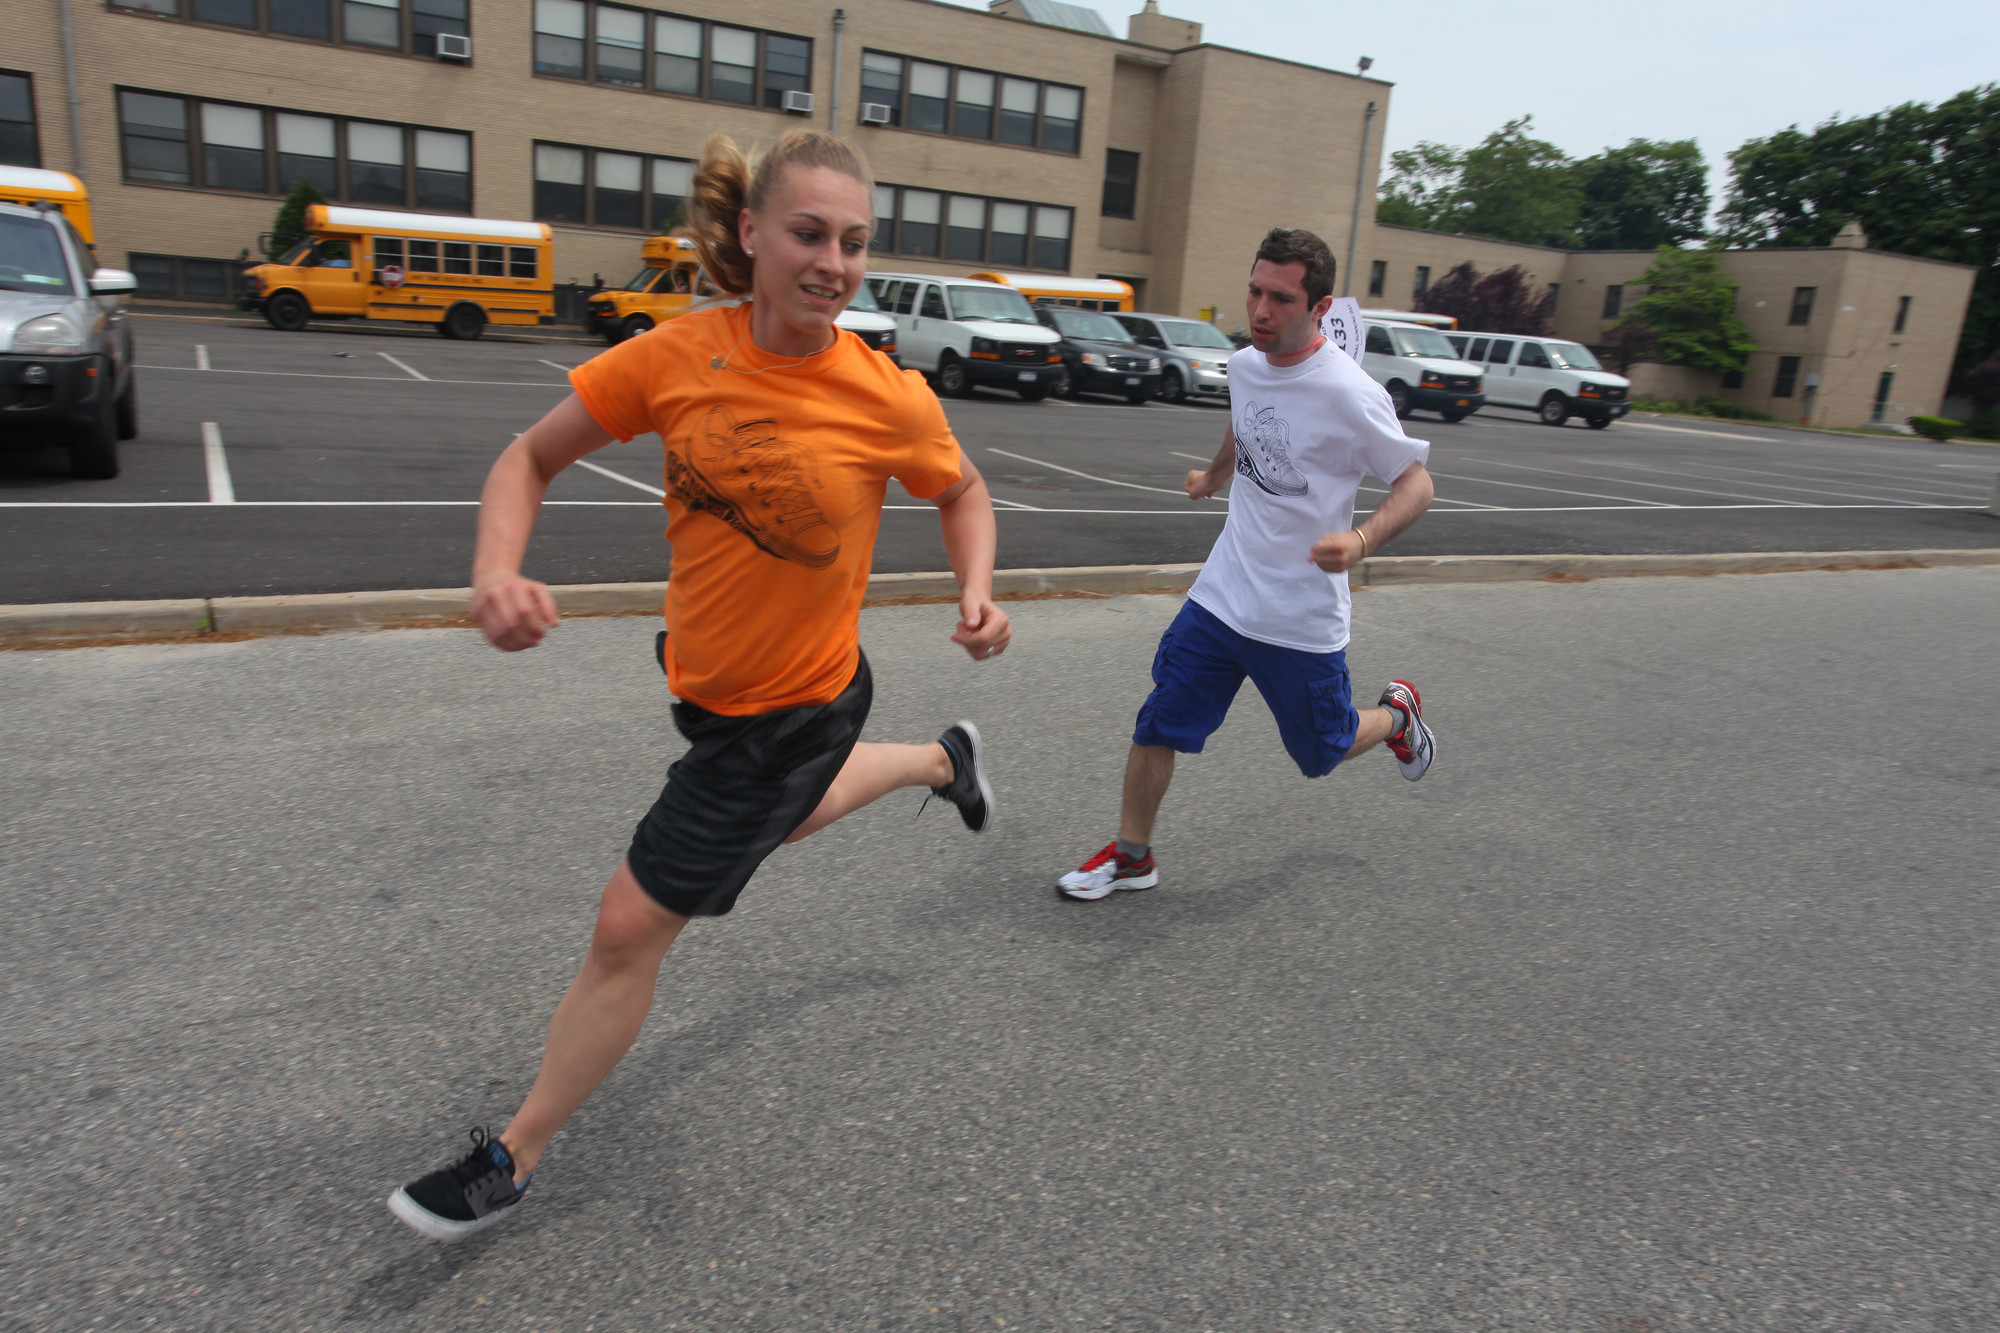 Bridget raced with Genesis student, Alex, outside St. Raphael’s Parish on Newbridge Road. According to the Genesis School, individuals with autism are at a high risk of  obesity.